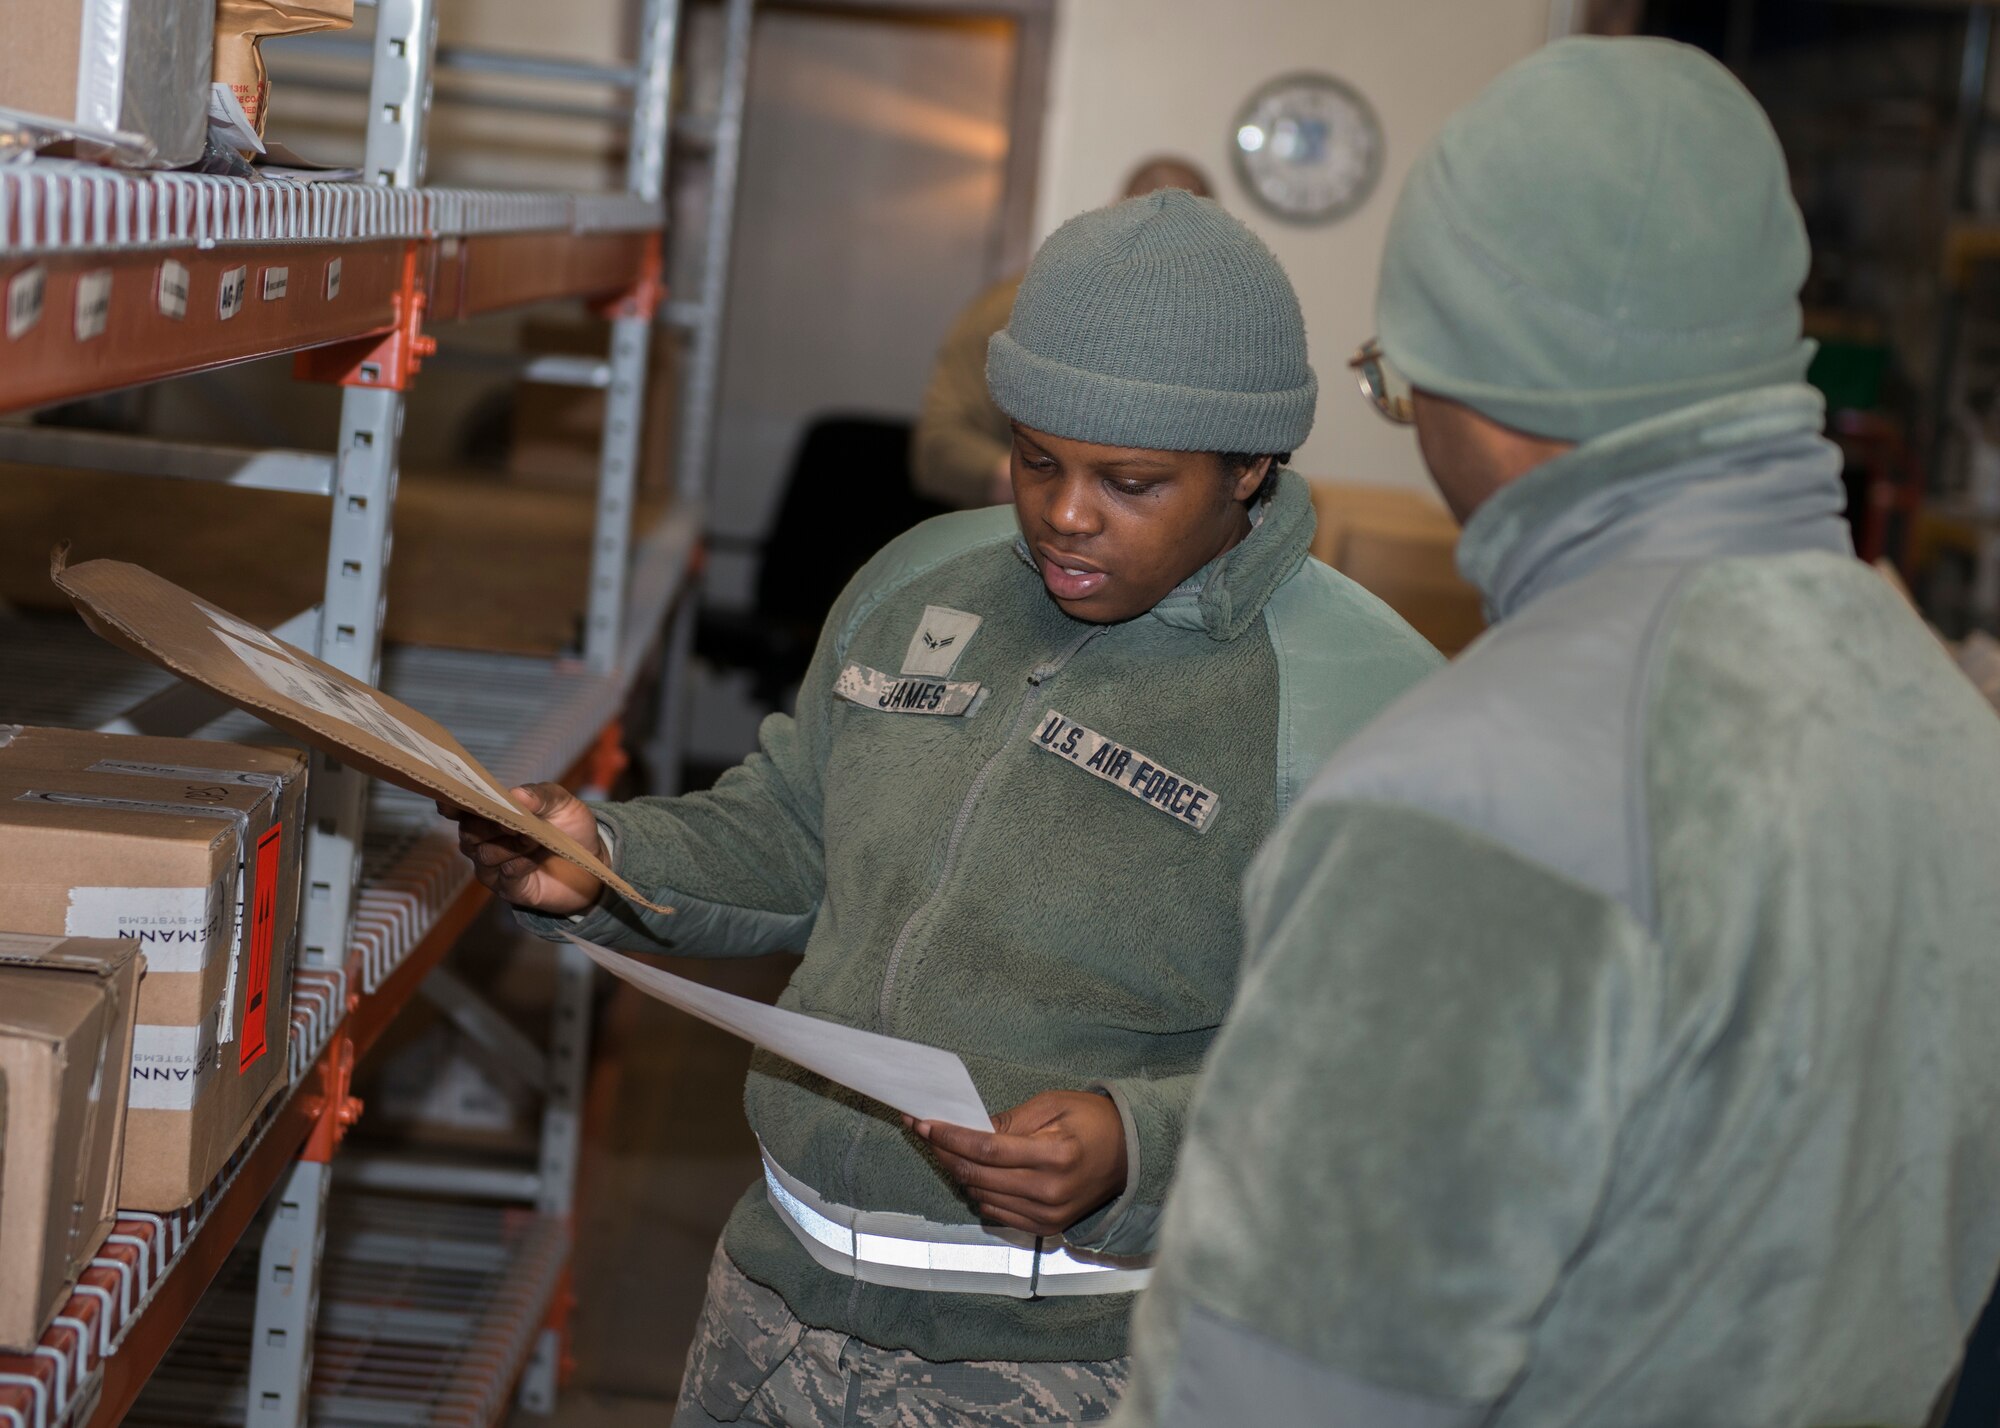 Airman 1st Class Zainab James (left) and Airman Basic Andre Minnis, 103rd Logistics Readiness Squadron ground transportation specialists, prepare deliveries to organizations at Bradley Air National Guard Base, East Granby, Conn. Feb. 8, 2020. The Traffic Management Office delivers incoming equipment to organizations throughout the installation and prepares outgoing shipments. (U.S. Air National Guard photo by Staff Sgt. Steven Tucker)